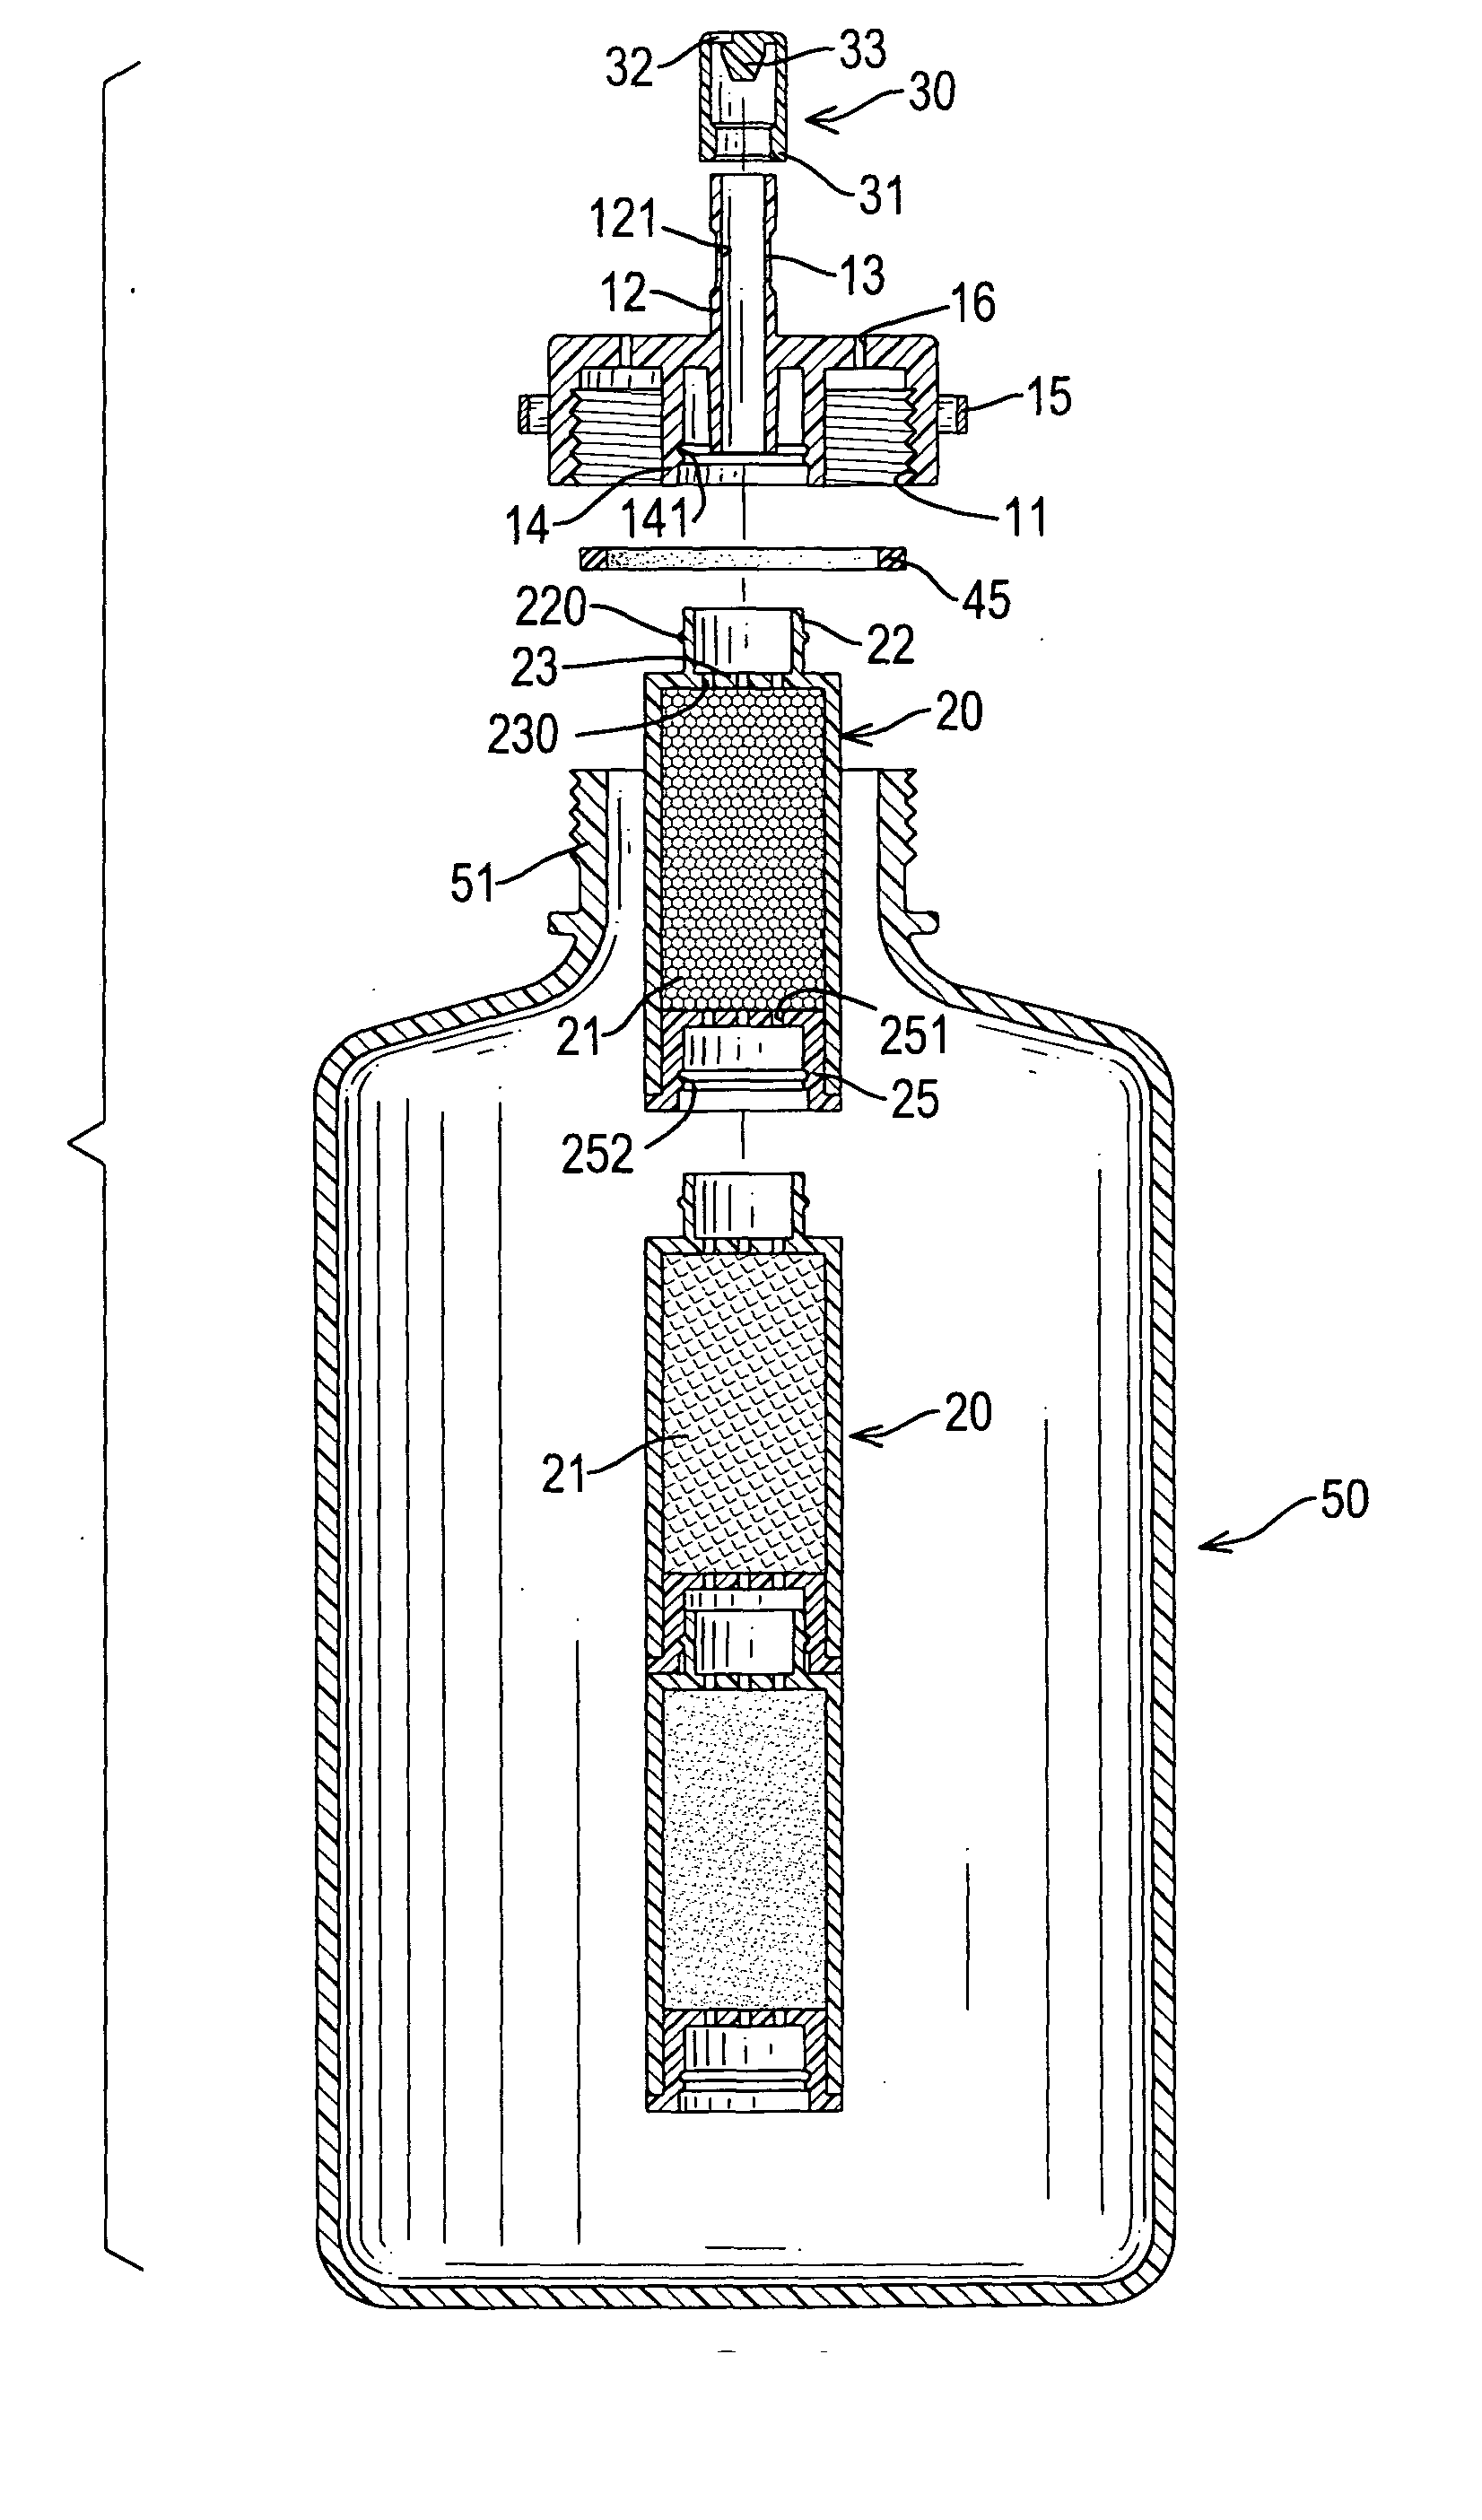 Filtering device for a portable beverage container